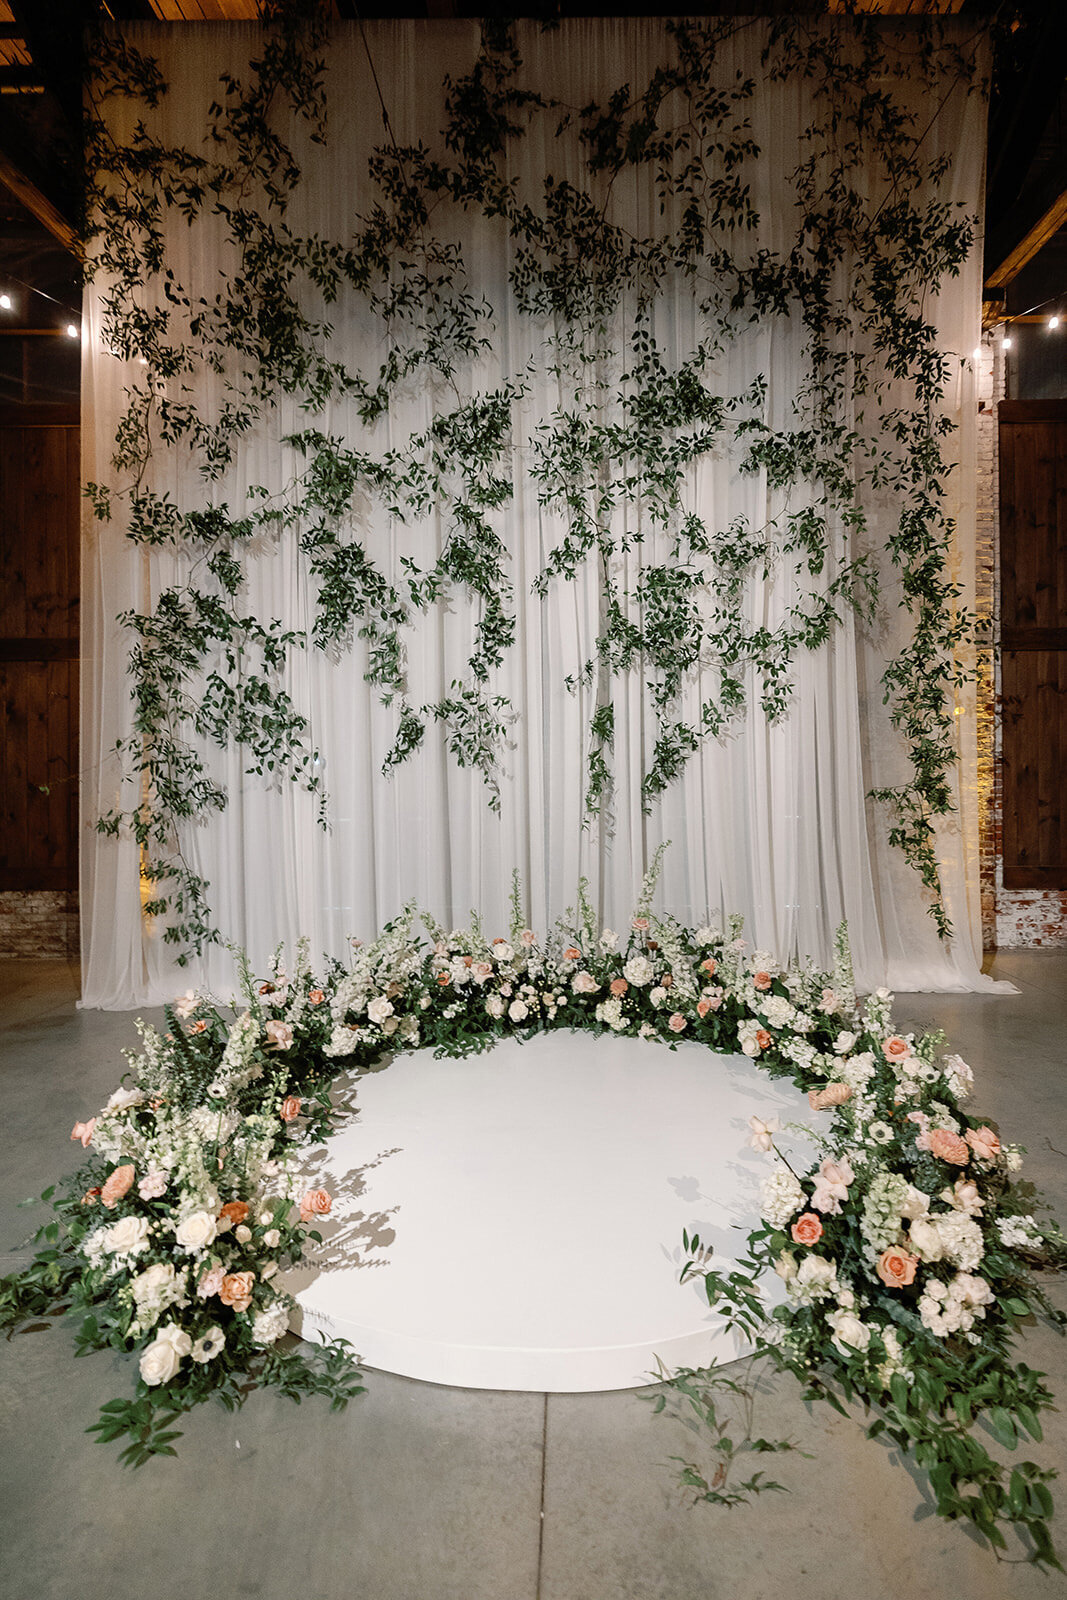 Kate-Murtaugh-Events-warehouse-wedding-planner-ceremony-stage-flowers